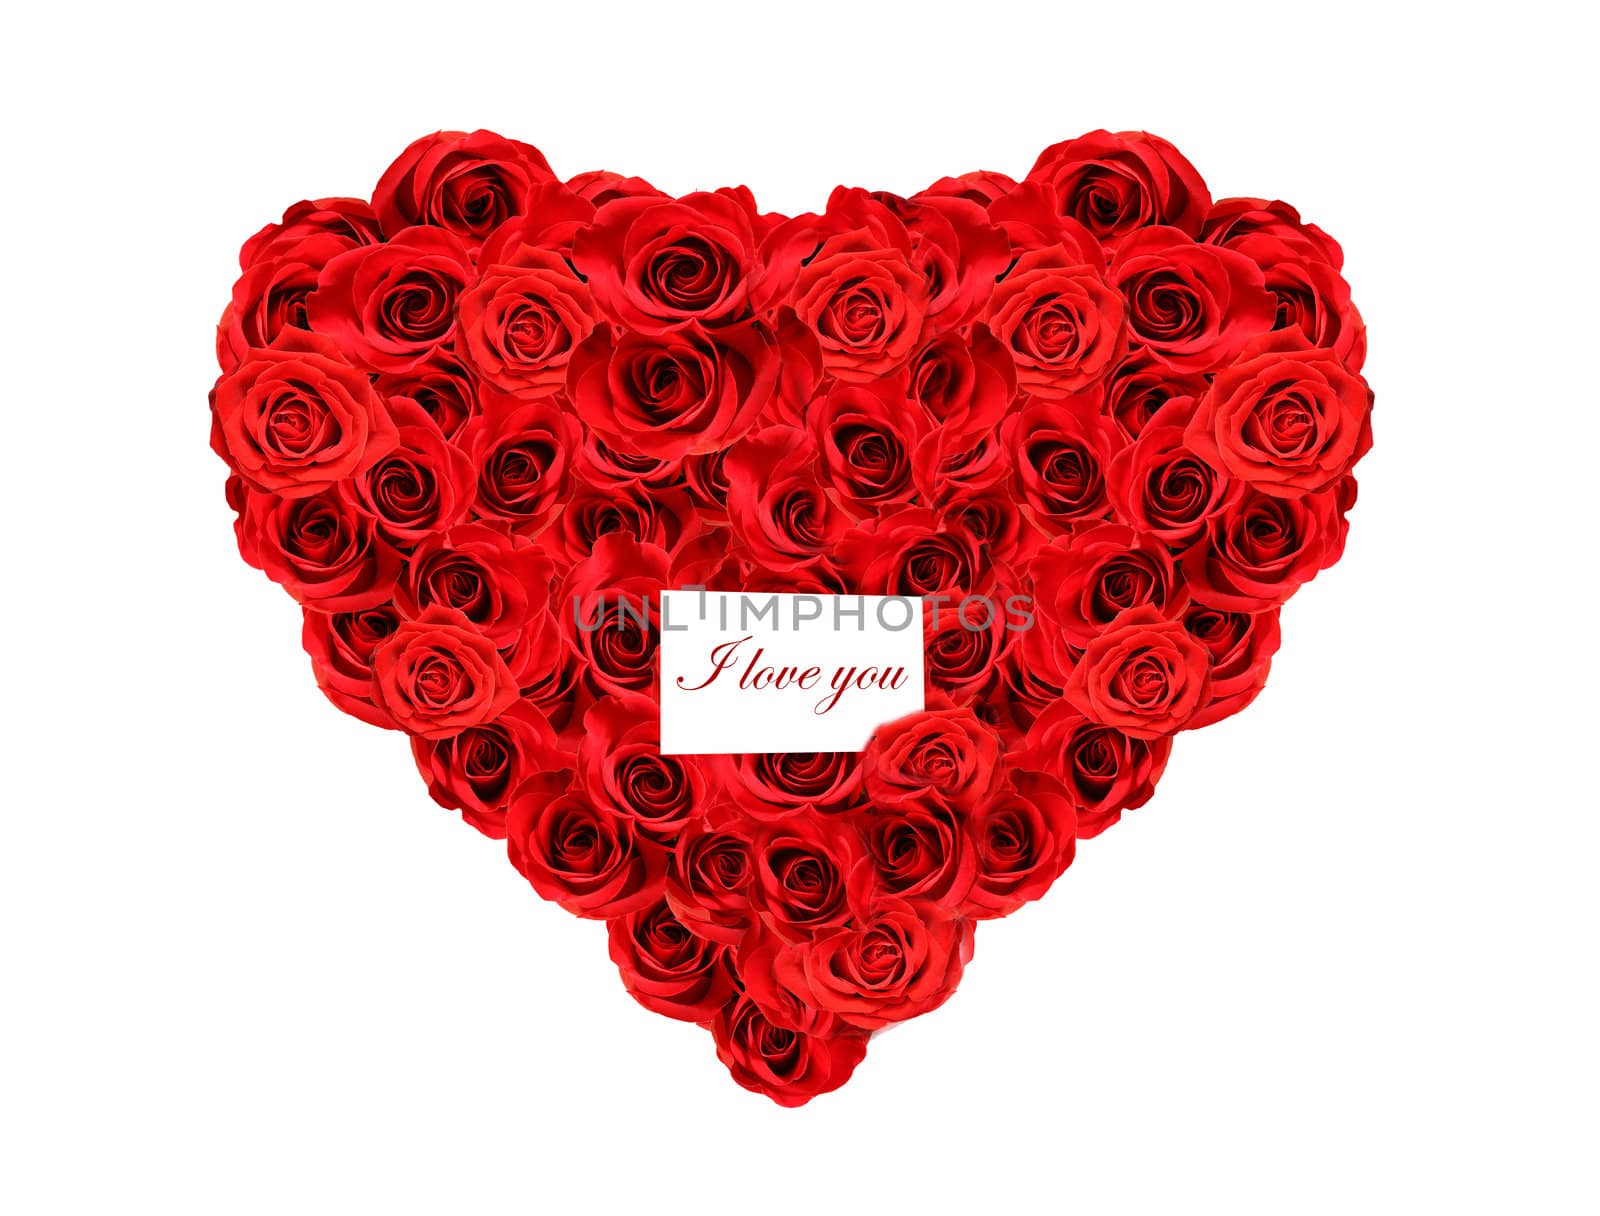 heart made from red roses and the message I love you